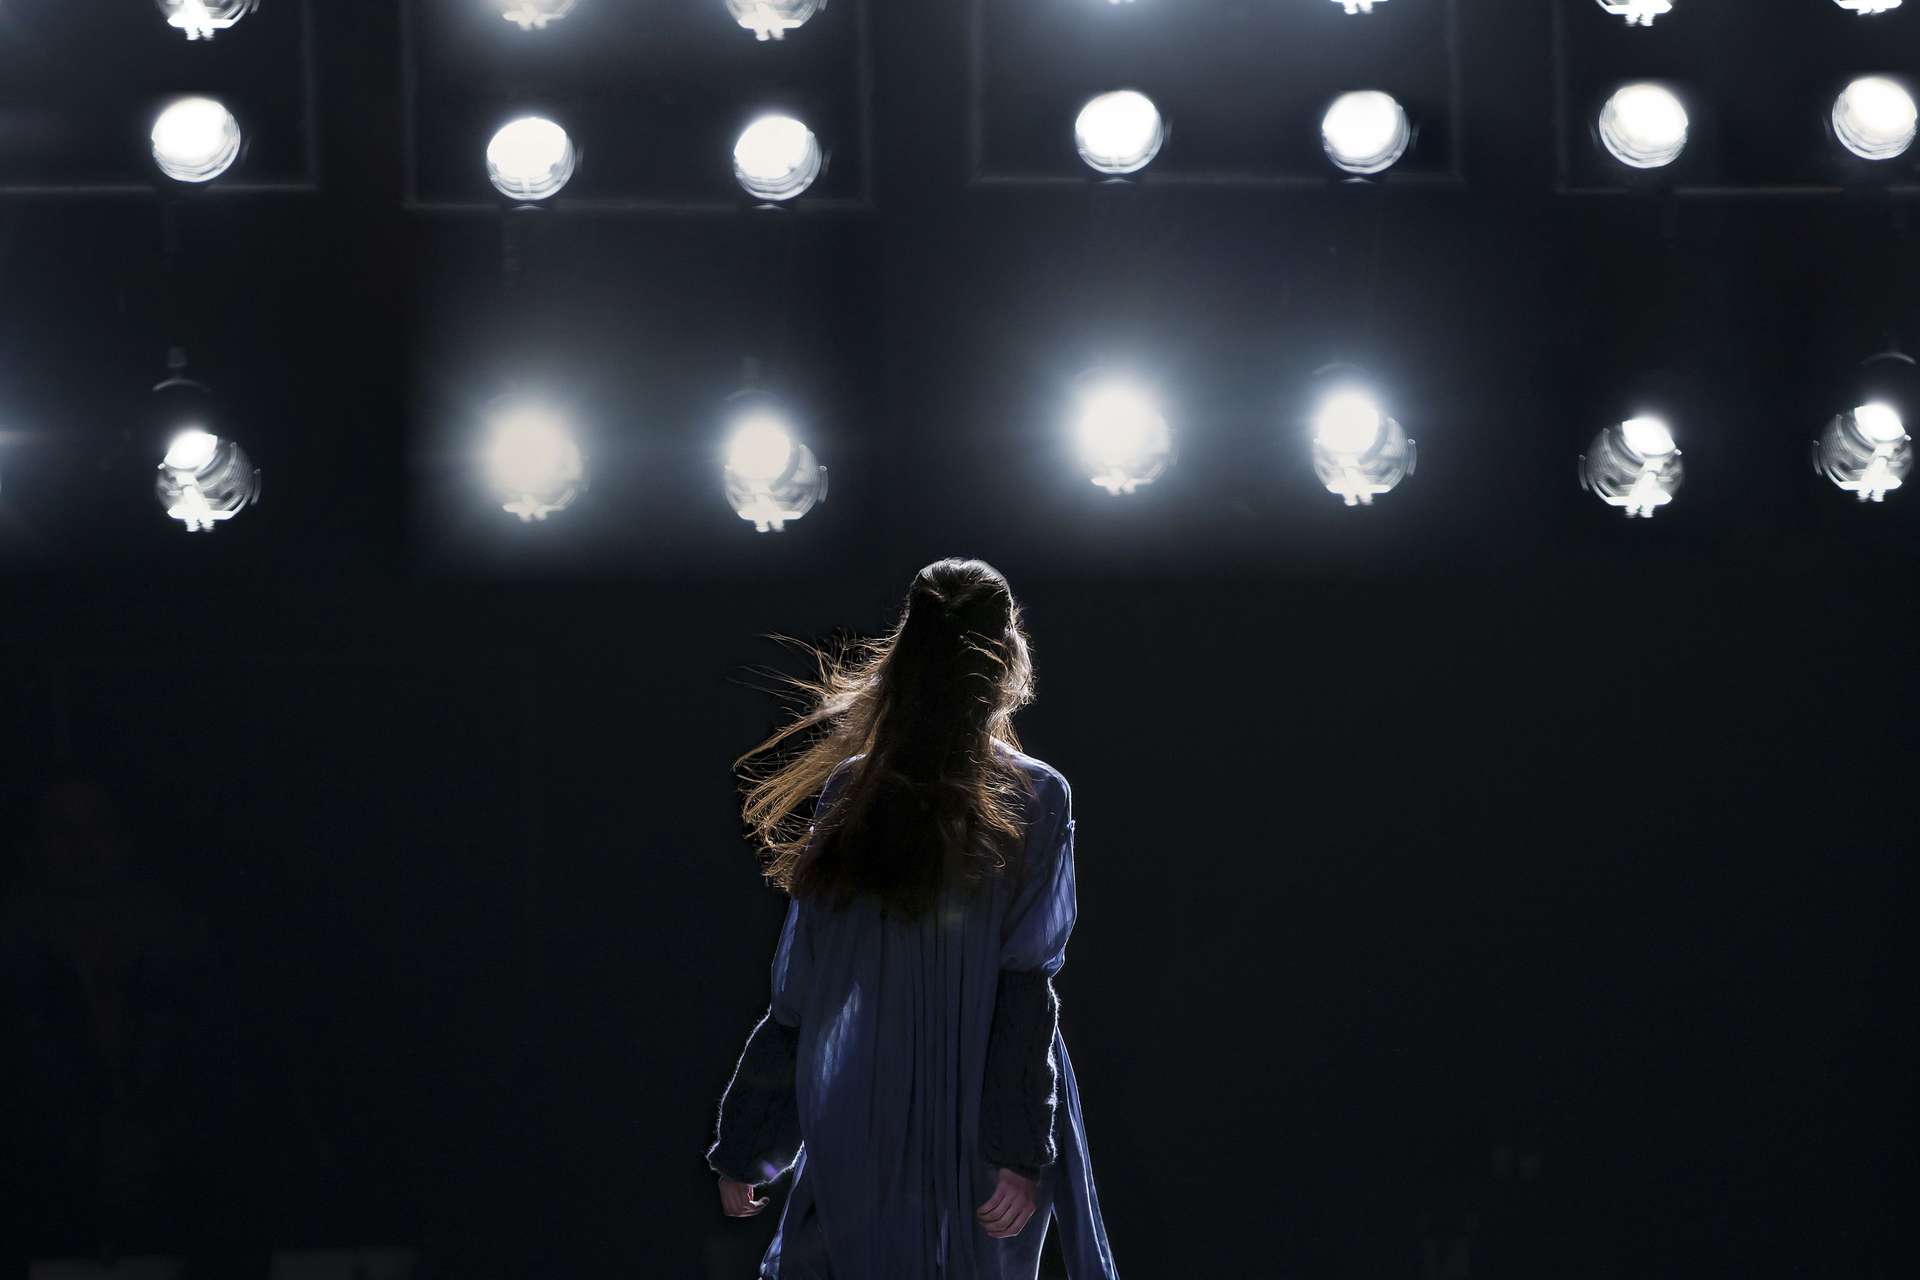 Model on a catwalk at a fashion show